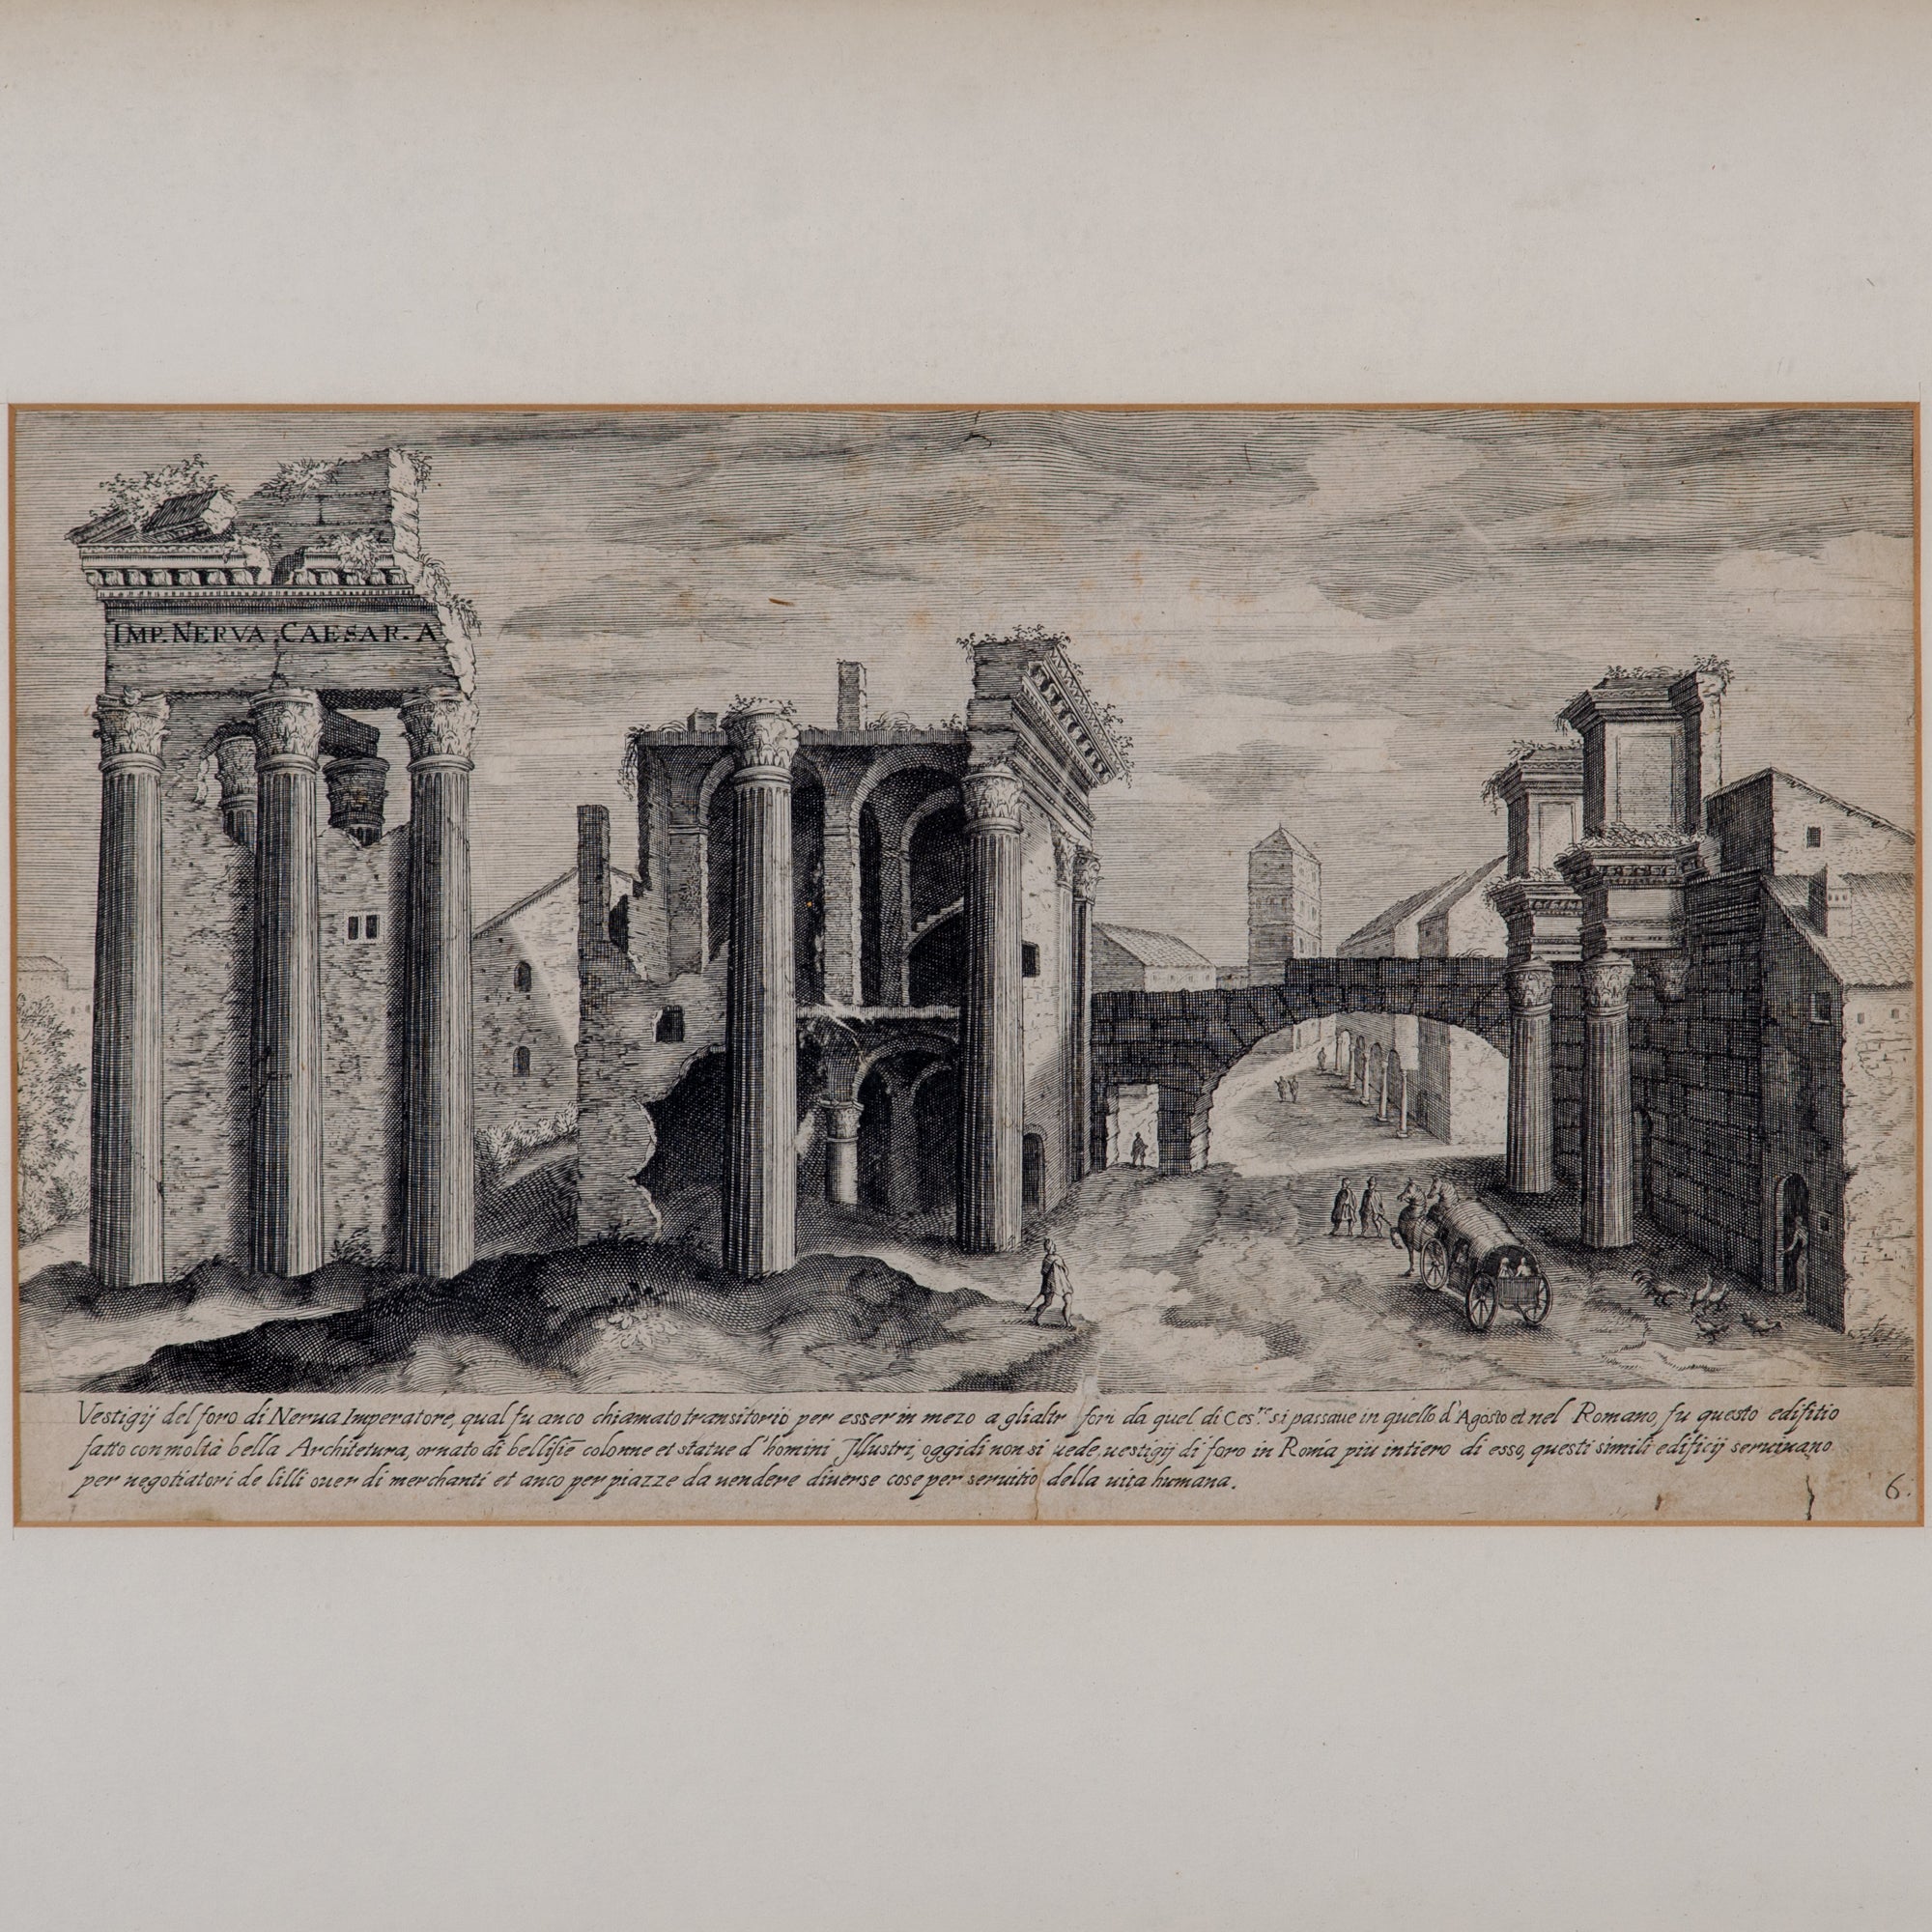 Étienne Dupérac Etchings of Ancient Roman Ruins, 17th Century - A Pair